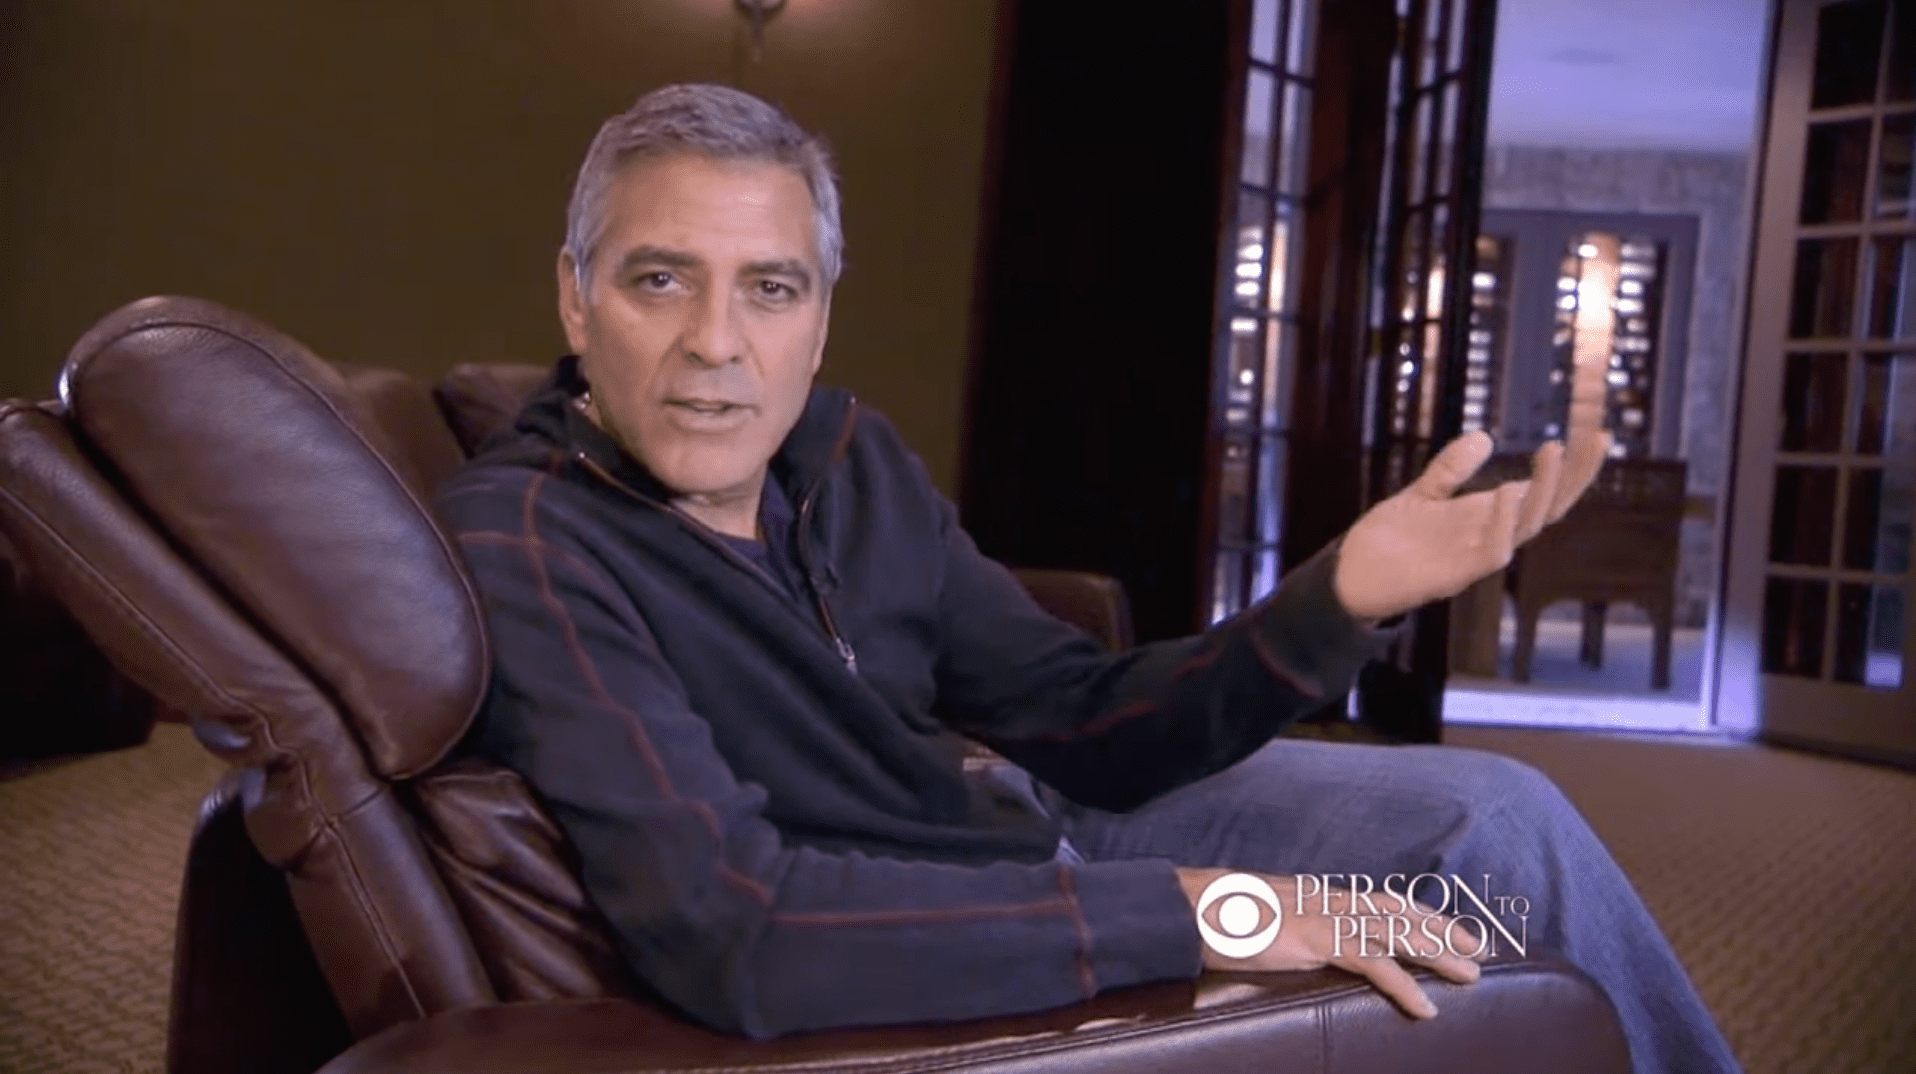 A part of George Clooney's Los Angeles home as seen on CBS News' "Person to Person" on February 9, 2012. | Source: YouTube/CBS News